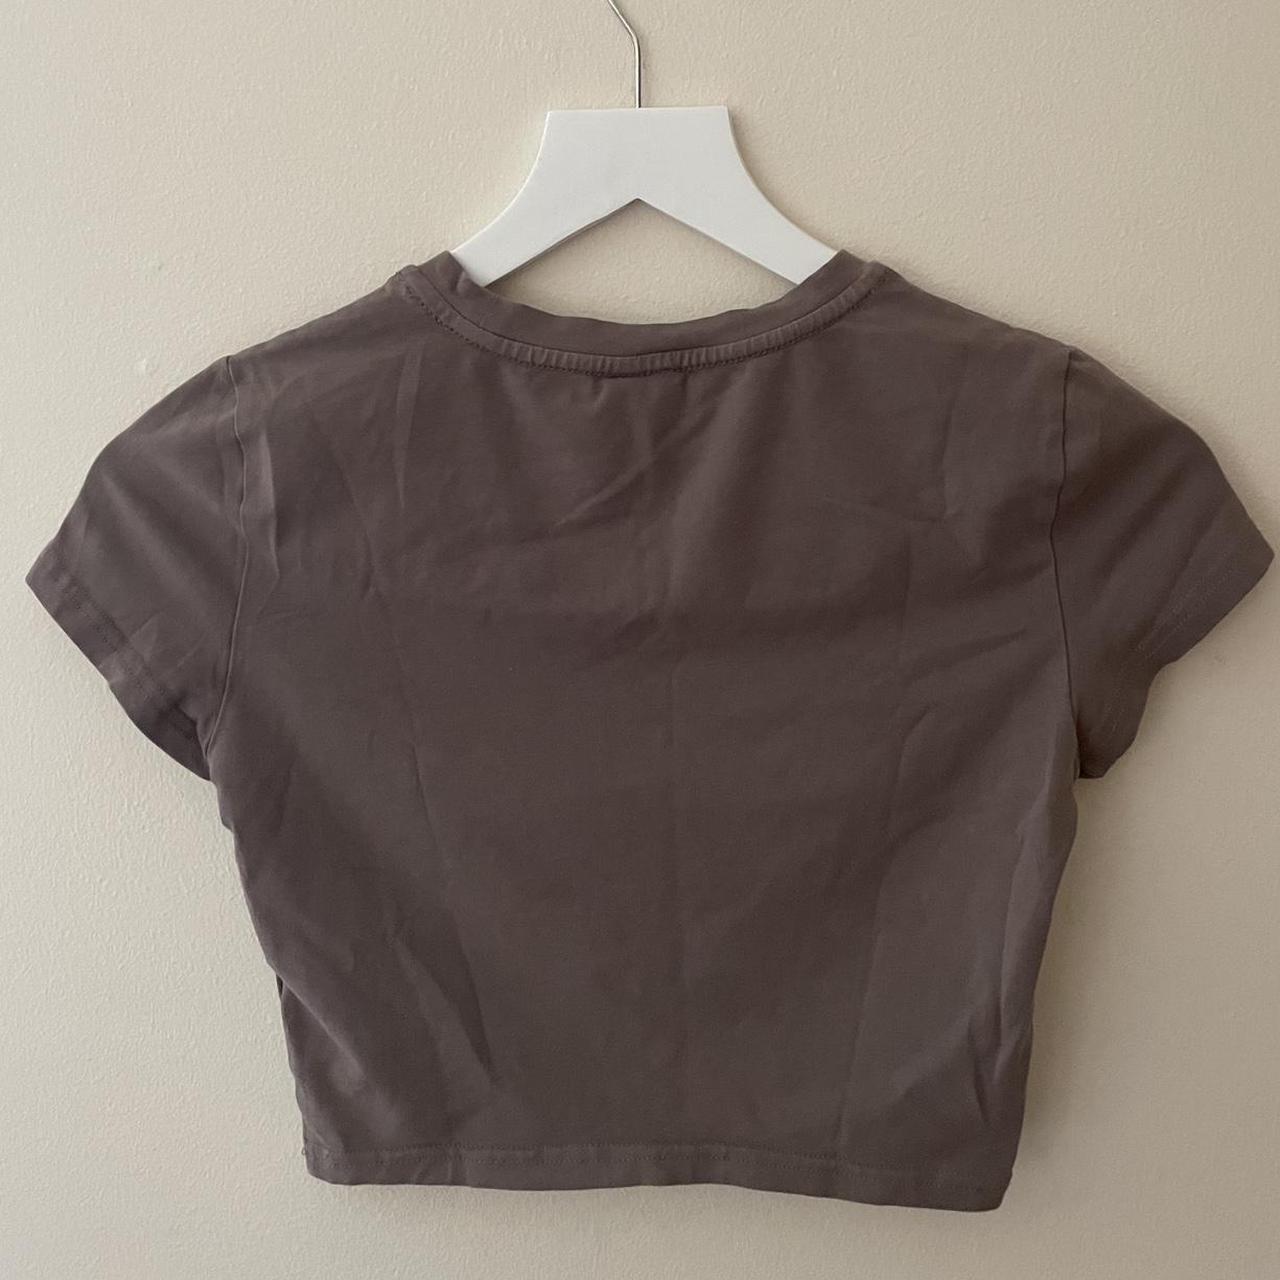 Aritzia tna top in taupe Worn a few times but there... - Depop